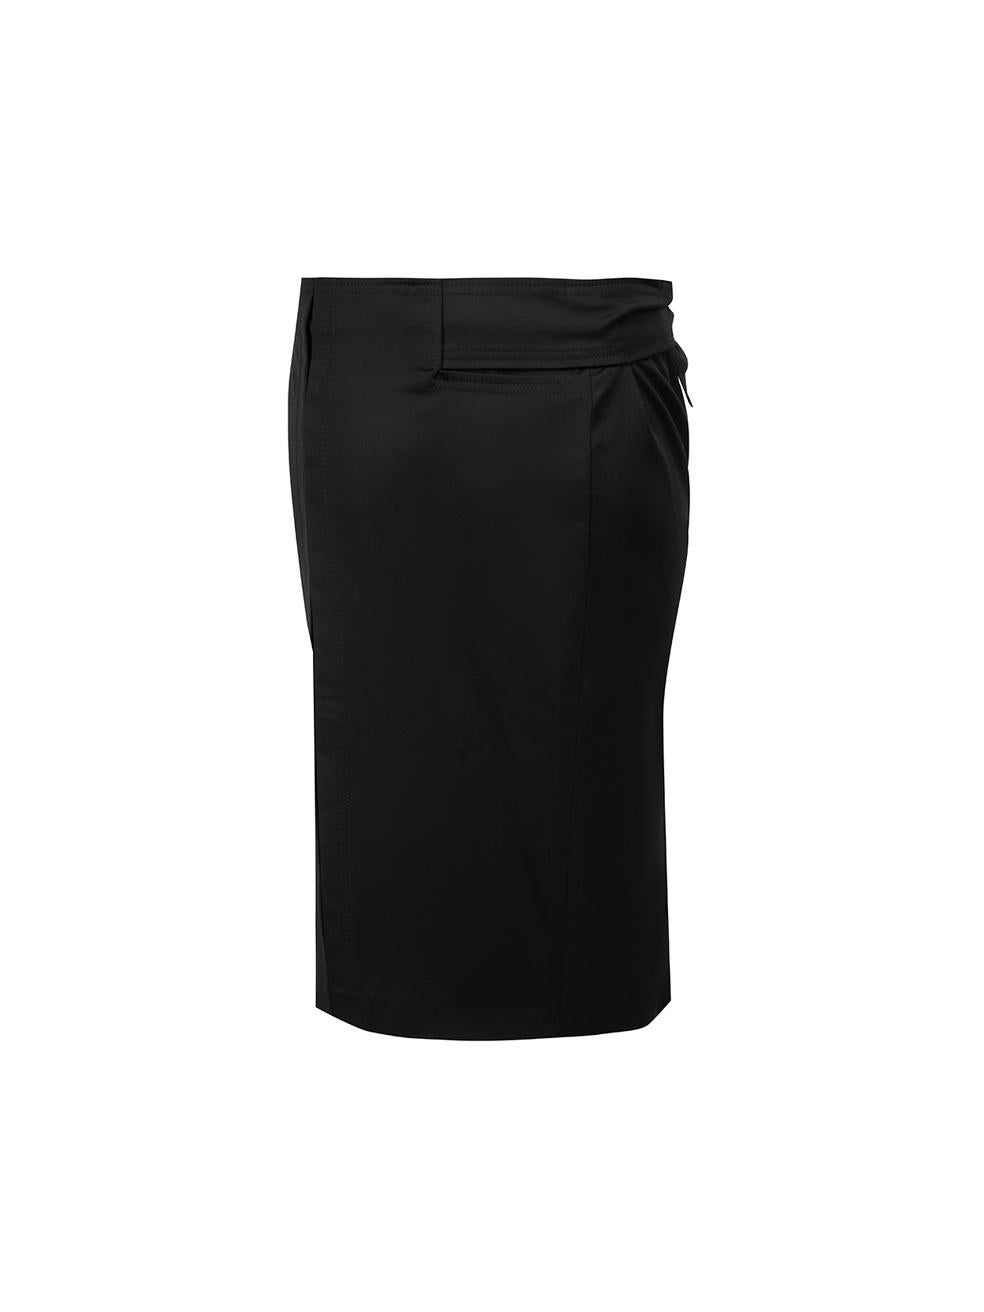 Black Wool Buckle Pencil Skirt Size S In Good Condition For Sale In London, GB